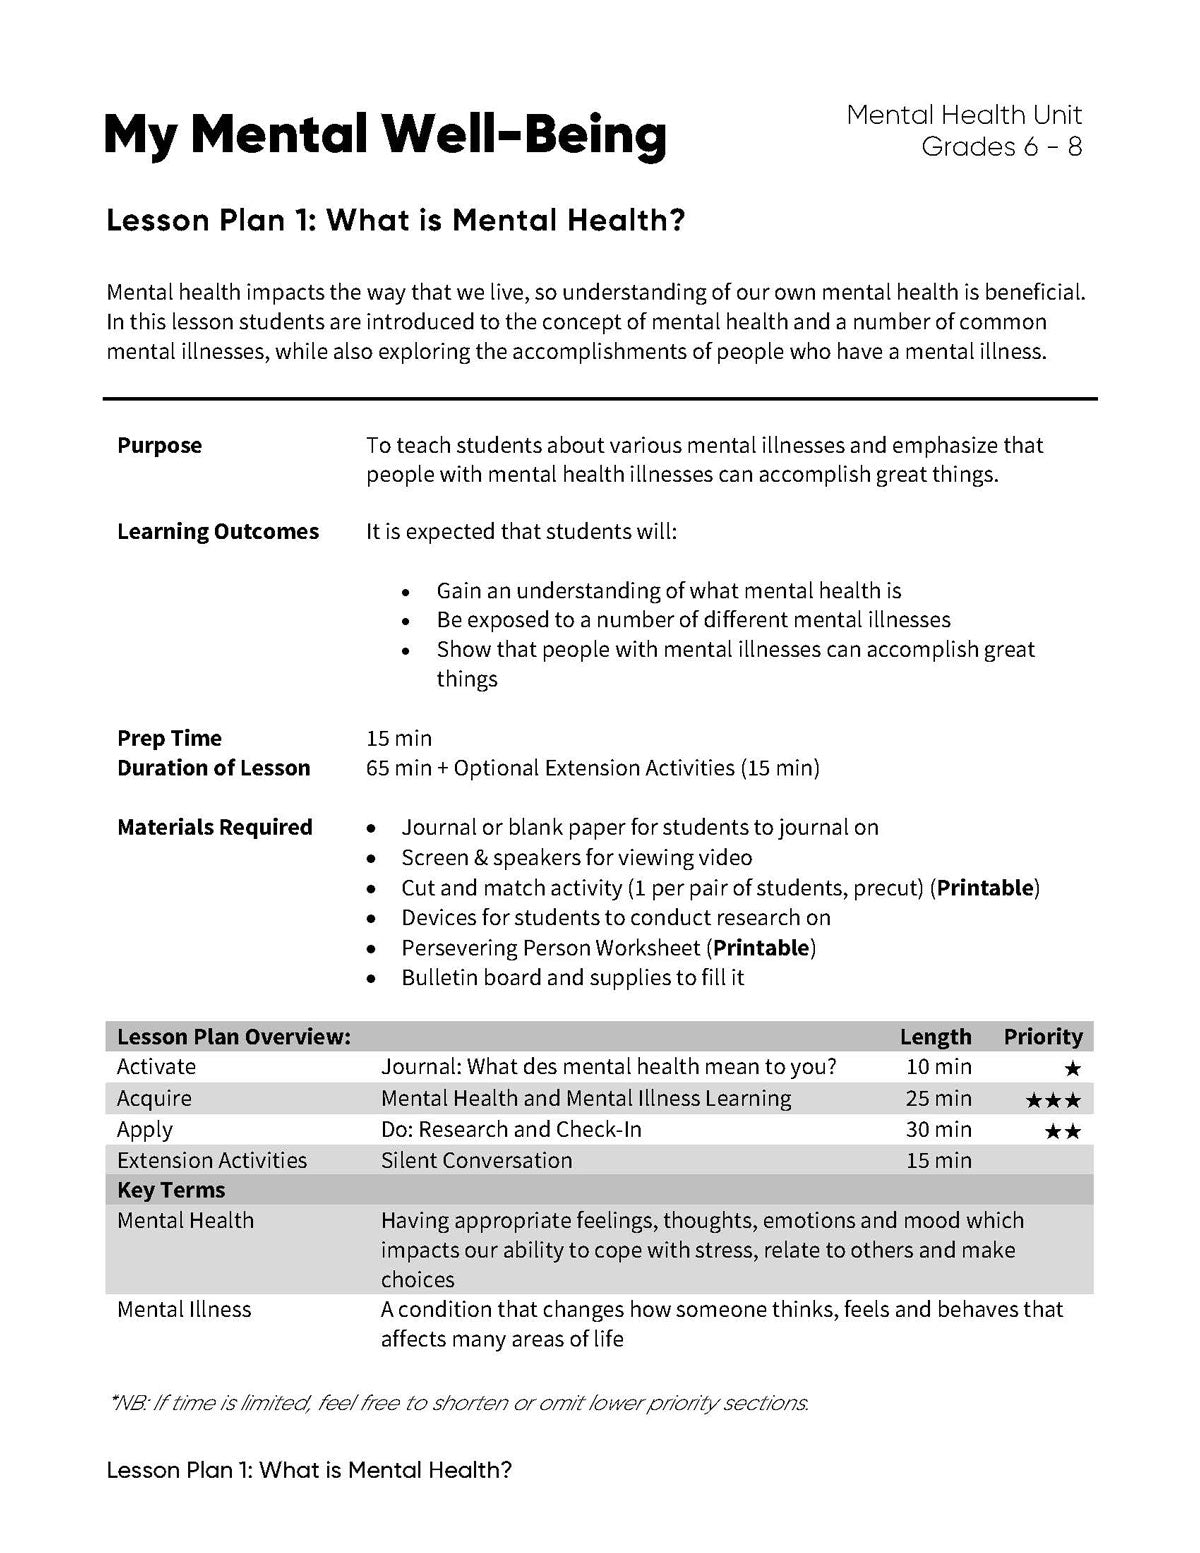 Lesson Plan 1: What is Mental Health?